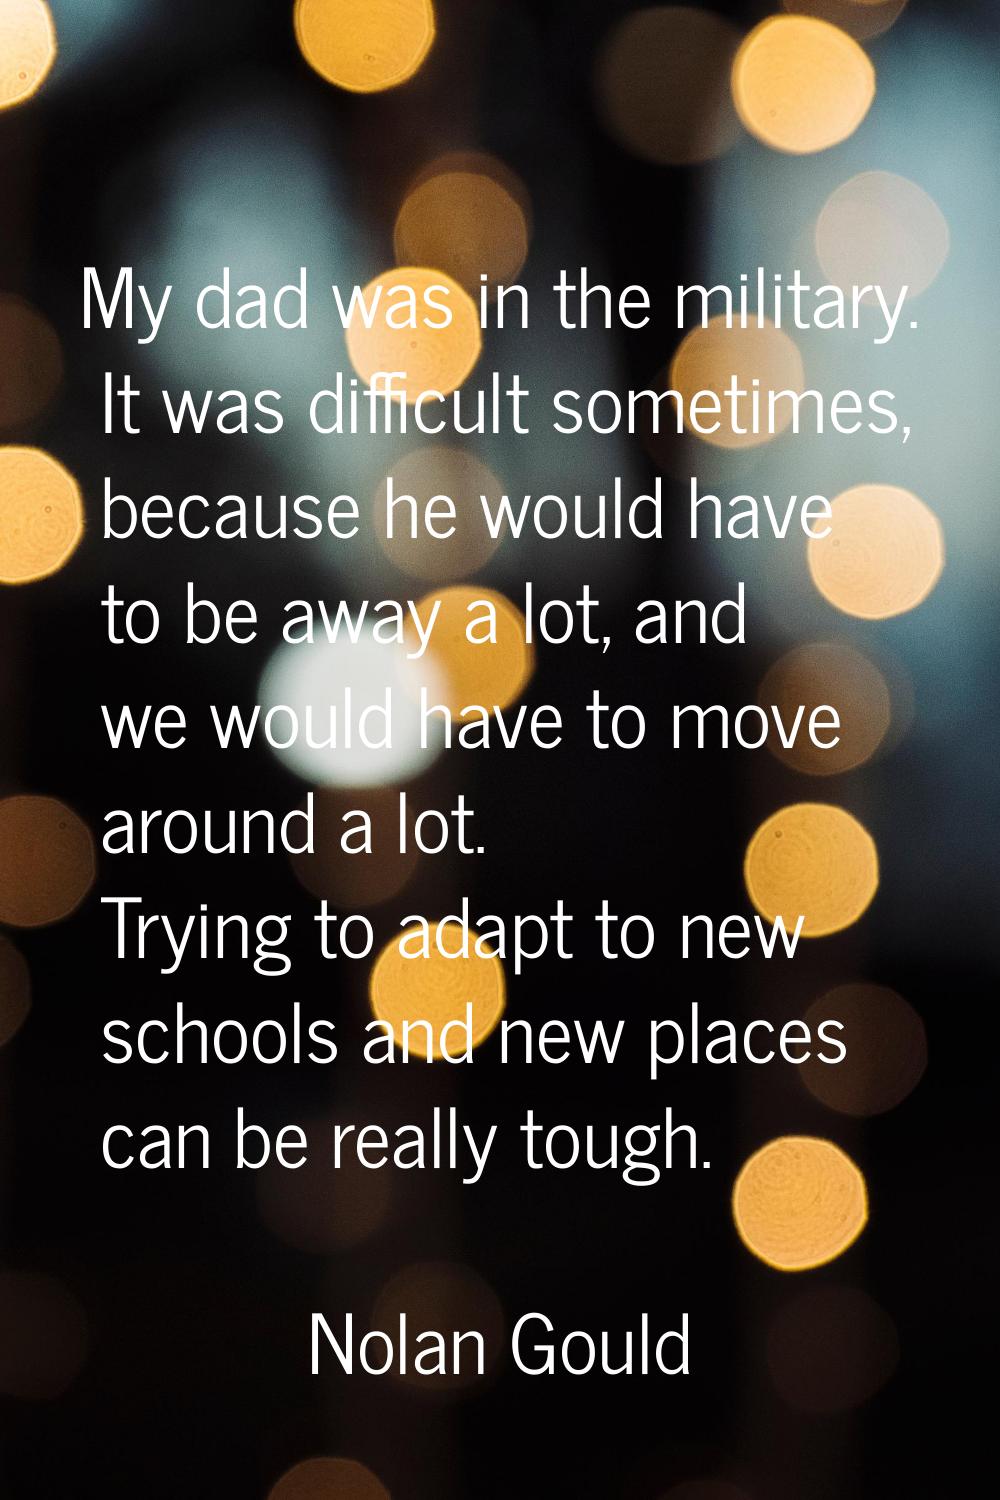 My dad was in the military. It was difficult sometimes, because he would have to be away a lot, and